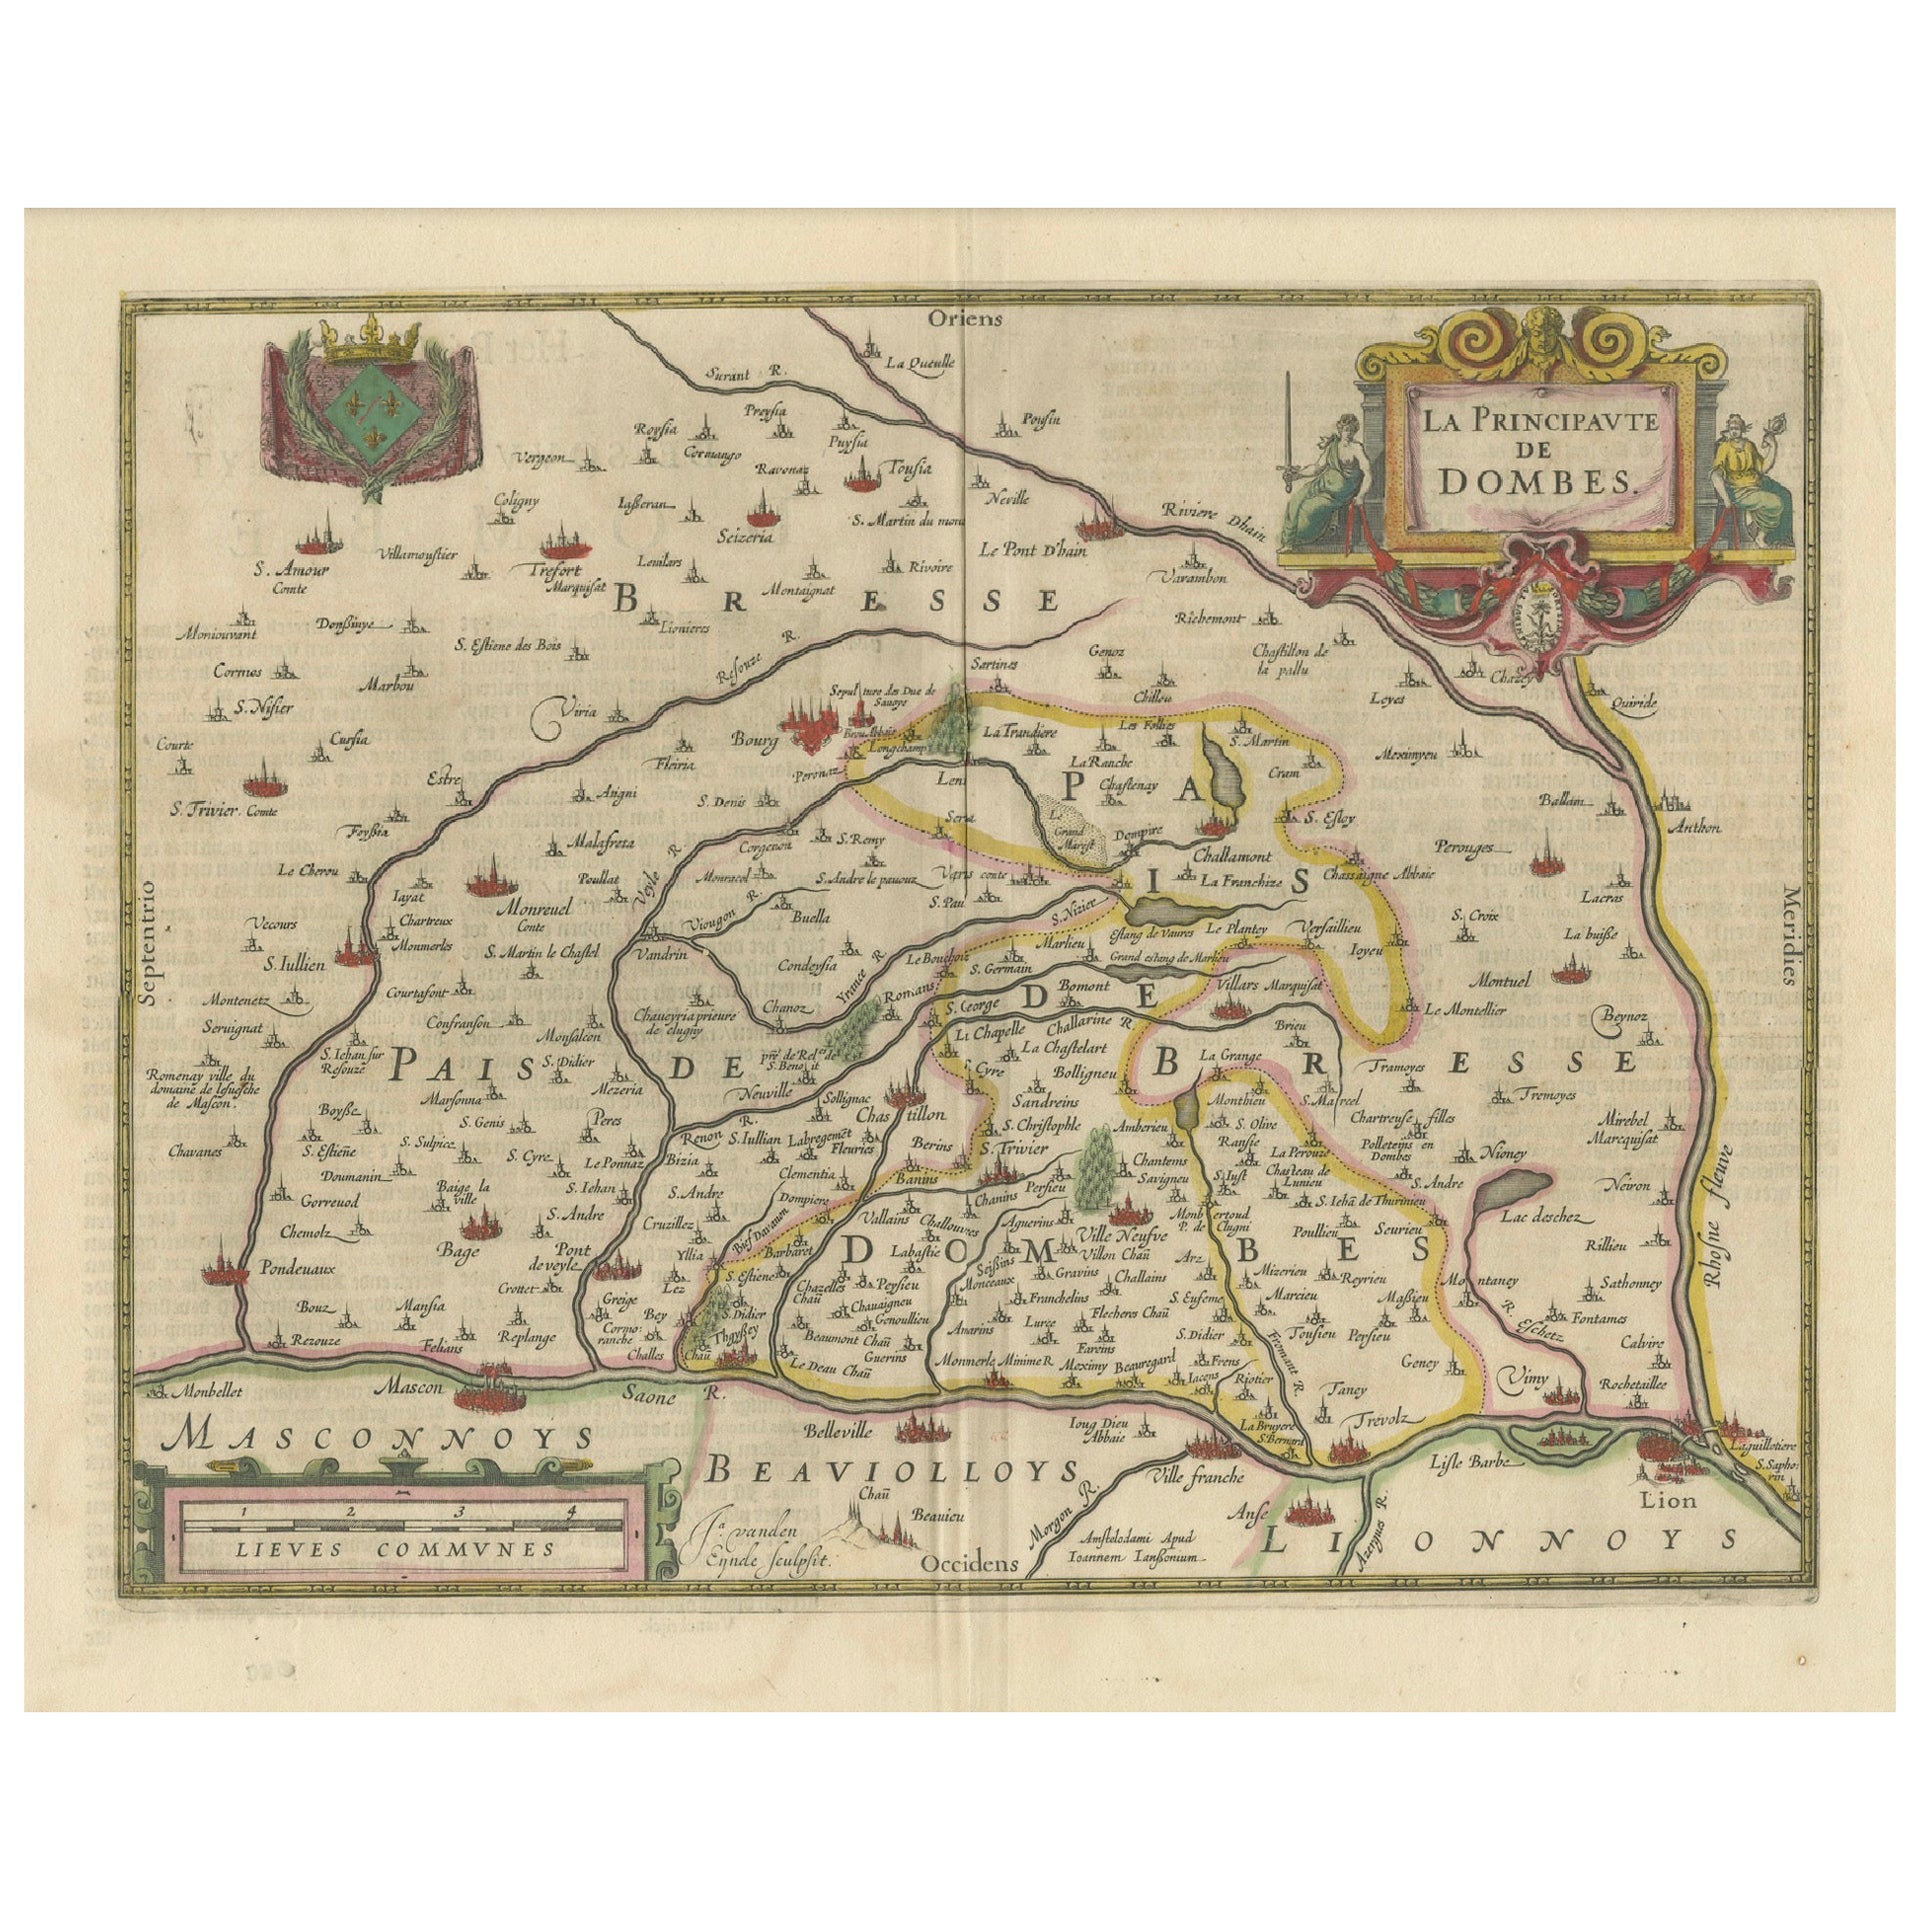 The Principality of Dombes: A 17th-Century Cartographic Jewel by Jan Jansson For Sale